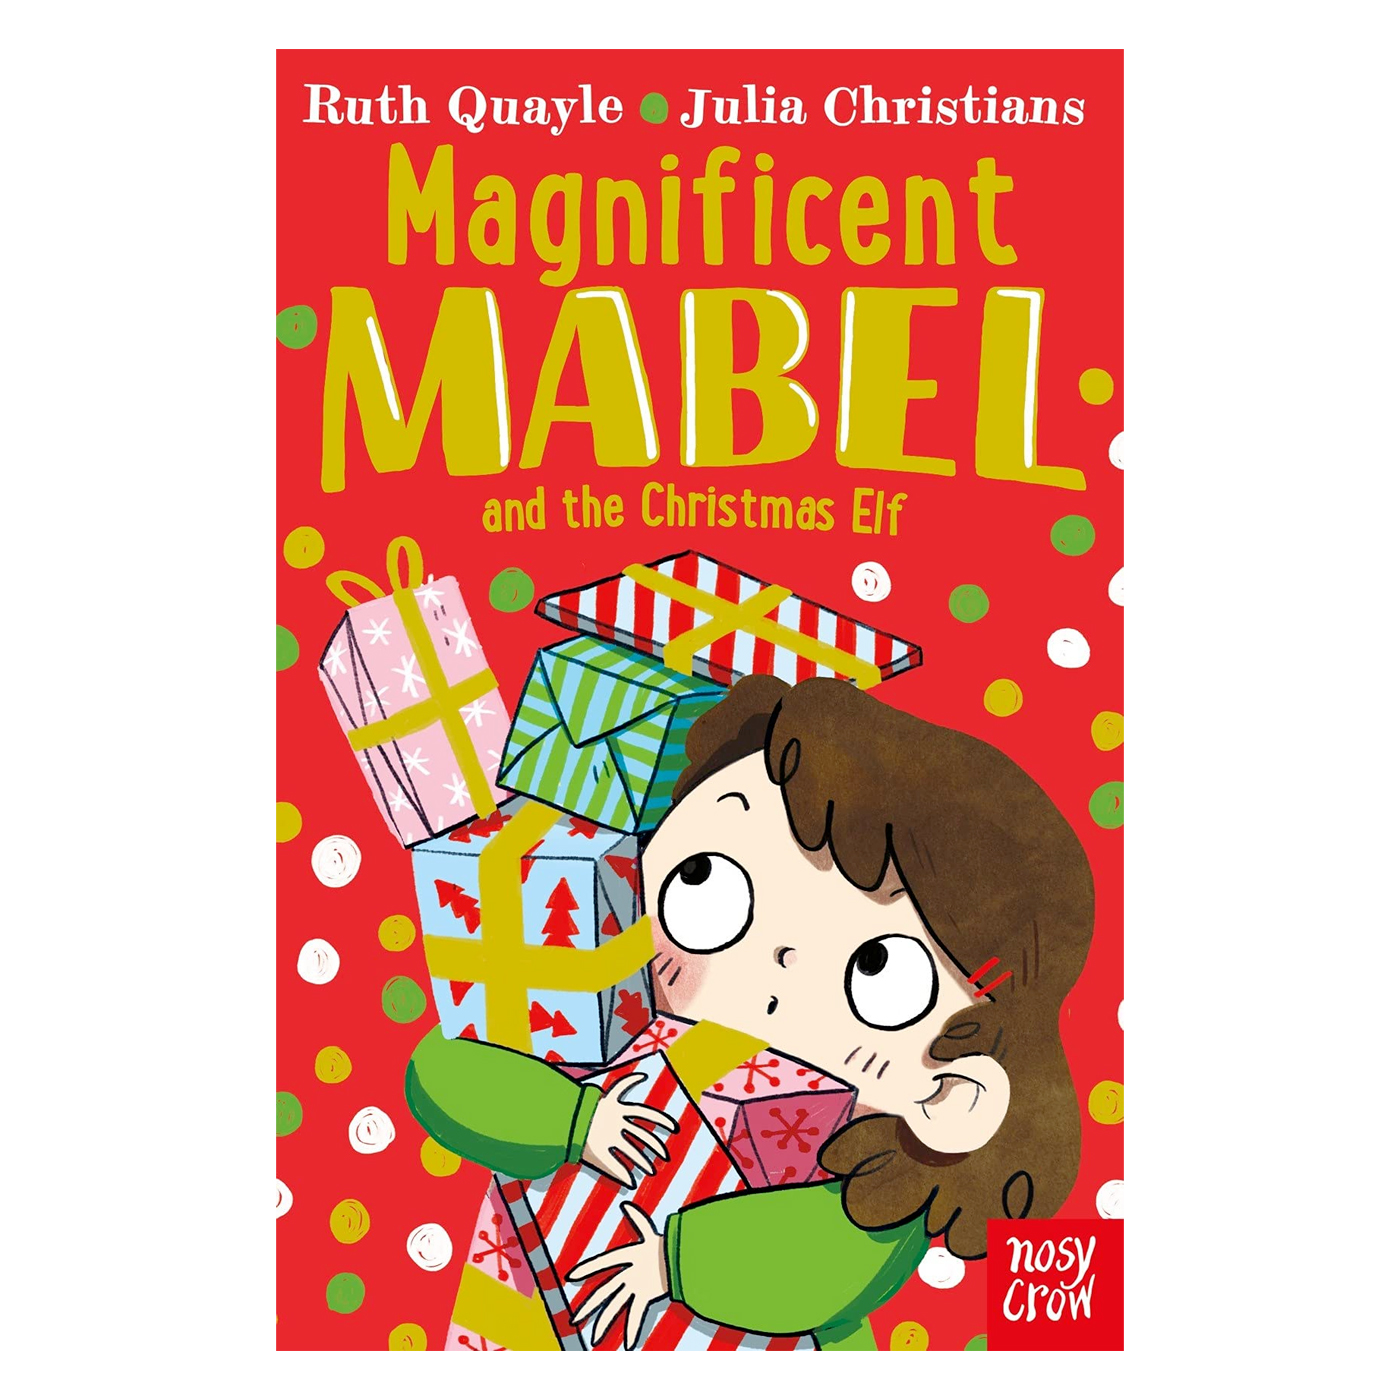  Magnificent Mabel and the Christmas Elf